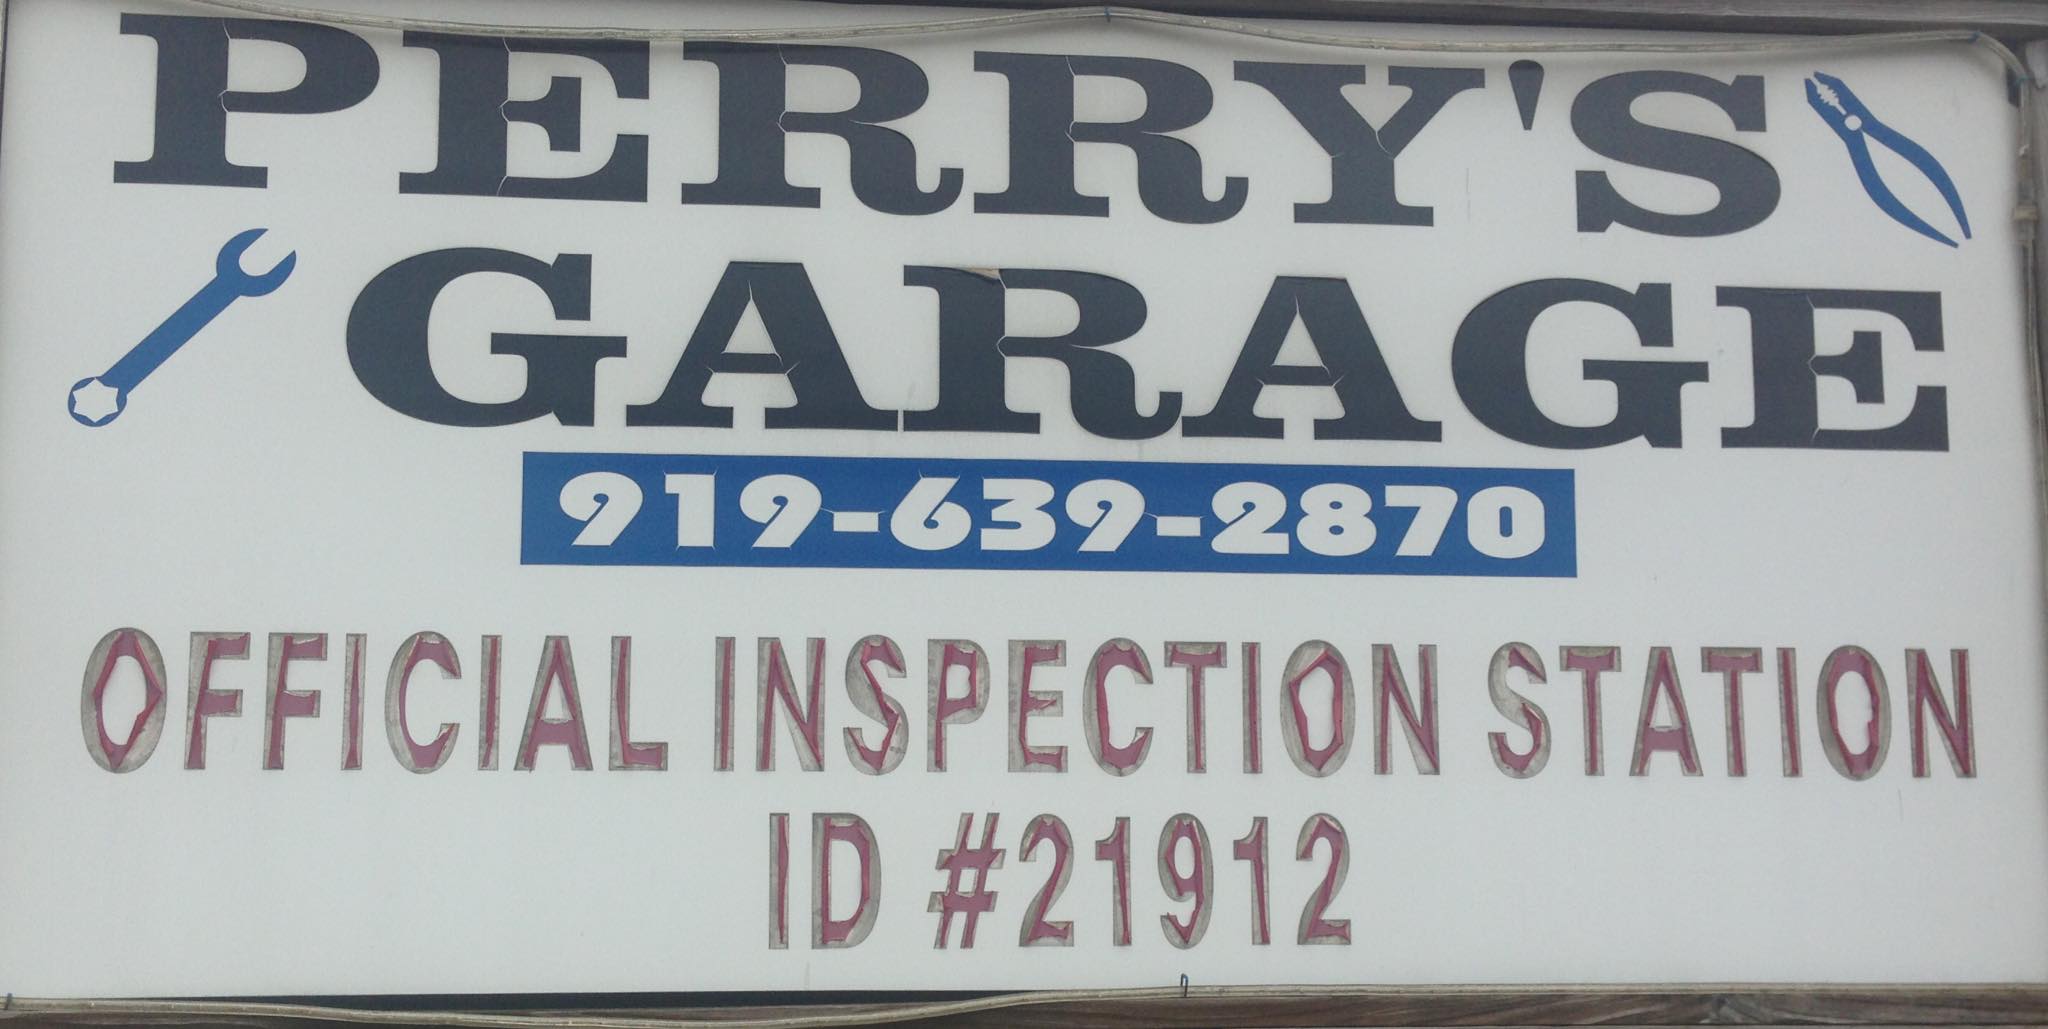 Perry's Garage